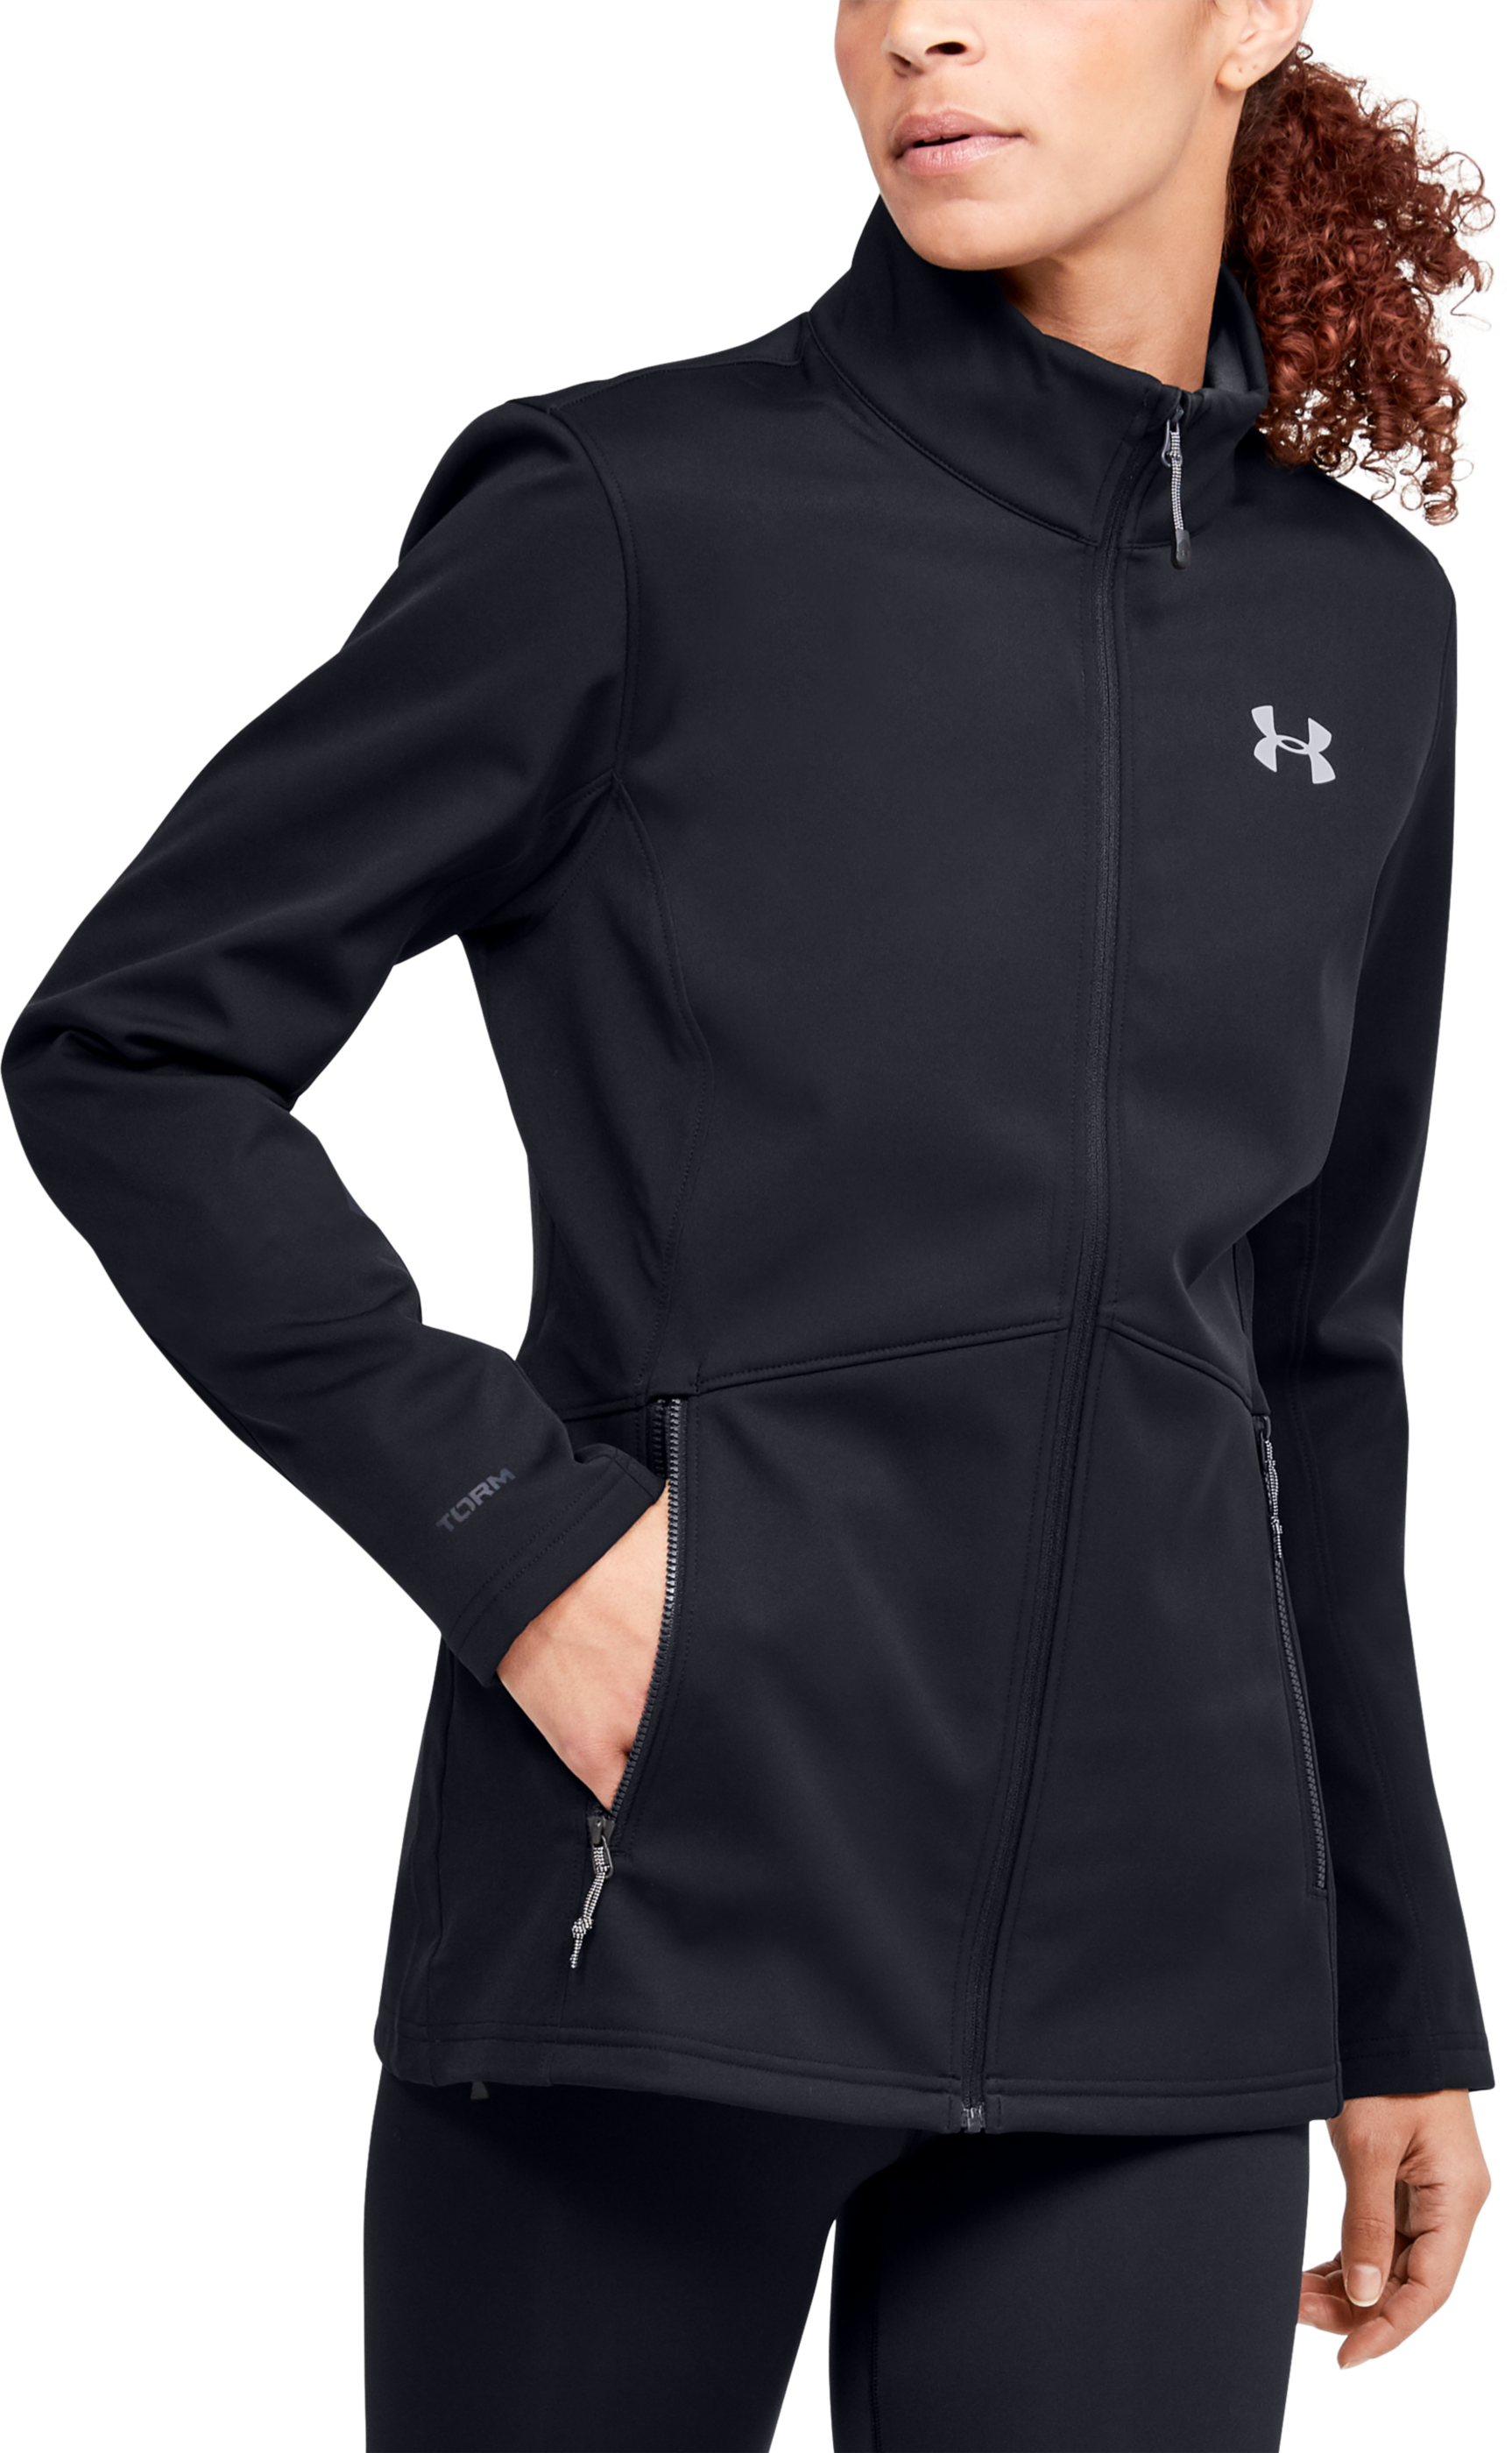 Under Armour Coldgear Infrared Shield Jacket for Ladies | Bass Pro Shops